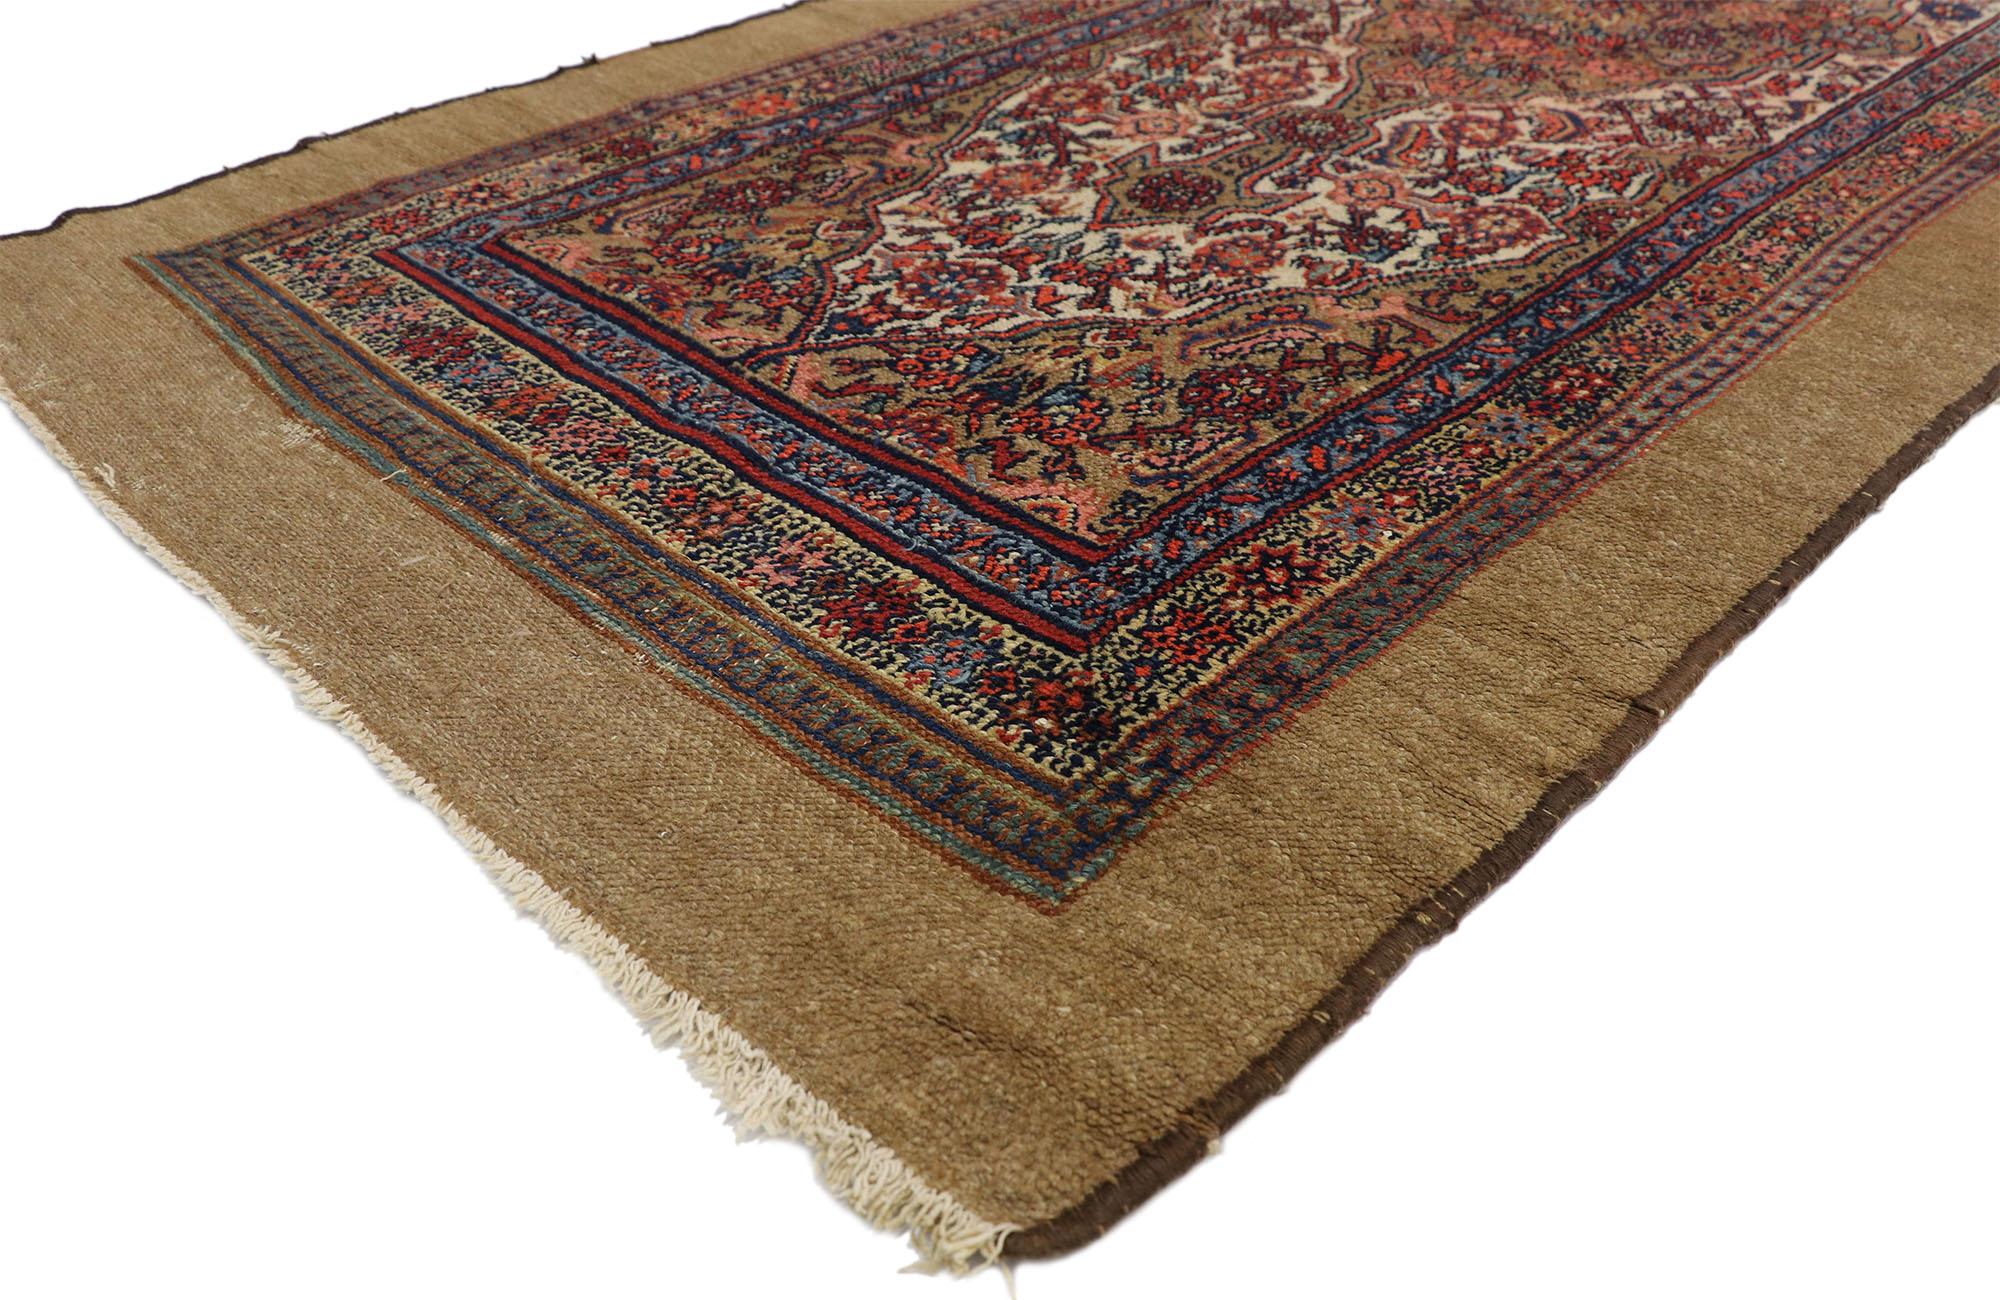 76654 Antique Persian Malayer Carpet Runner with Camel Hair, 03'05 x 20'05. Persian Malayer carpet runners are long, narrow rugs handcrafted in the city of Malayer, located in western Iran. These runners are renowned for their intricate designs,